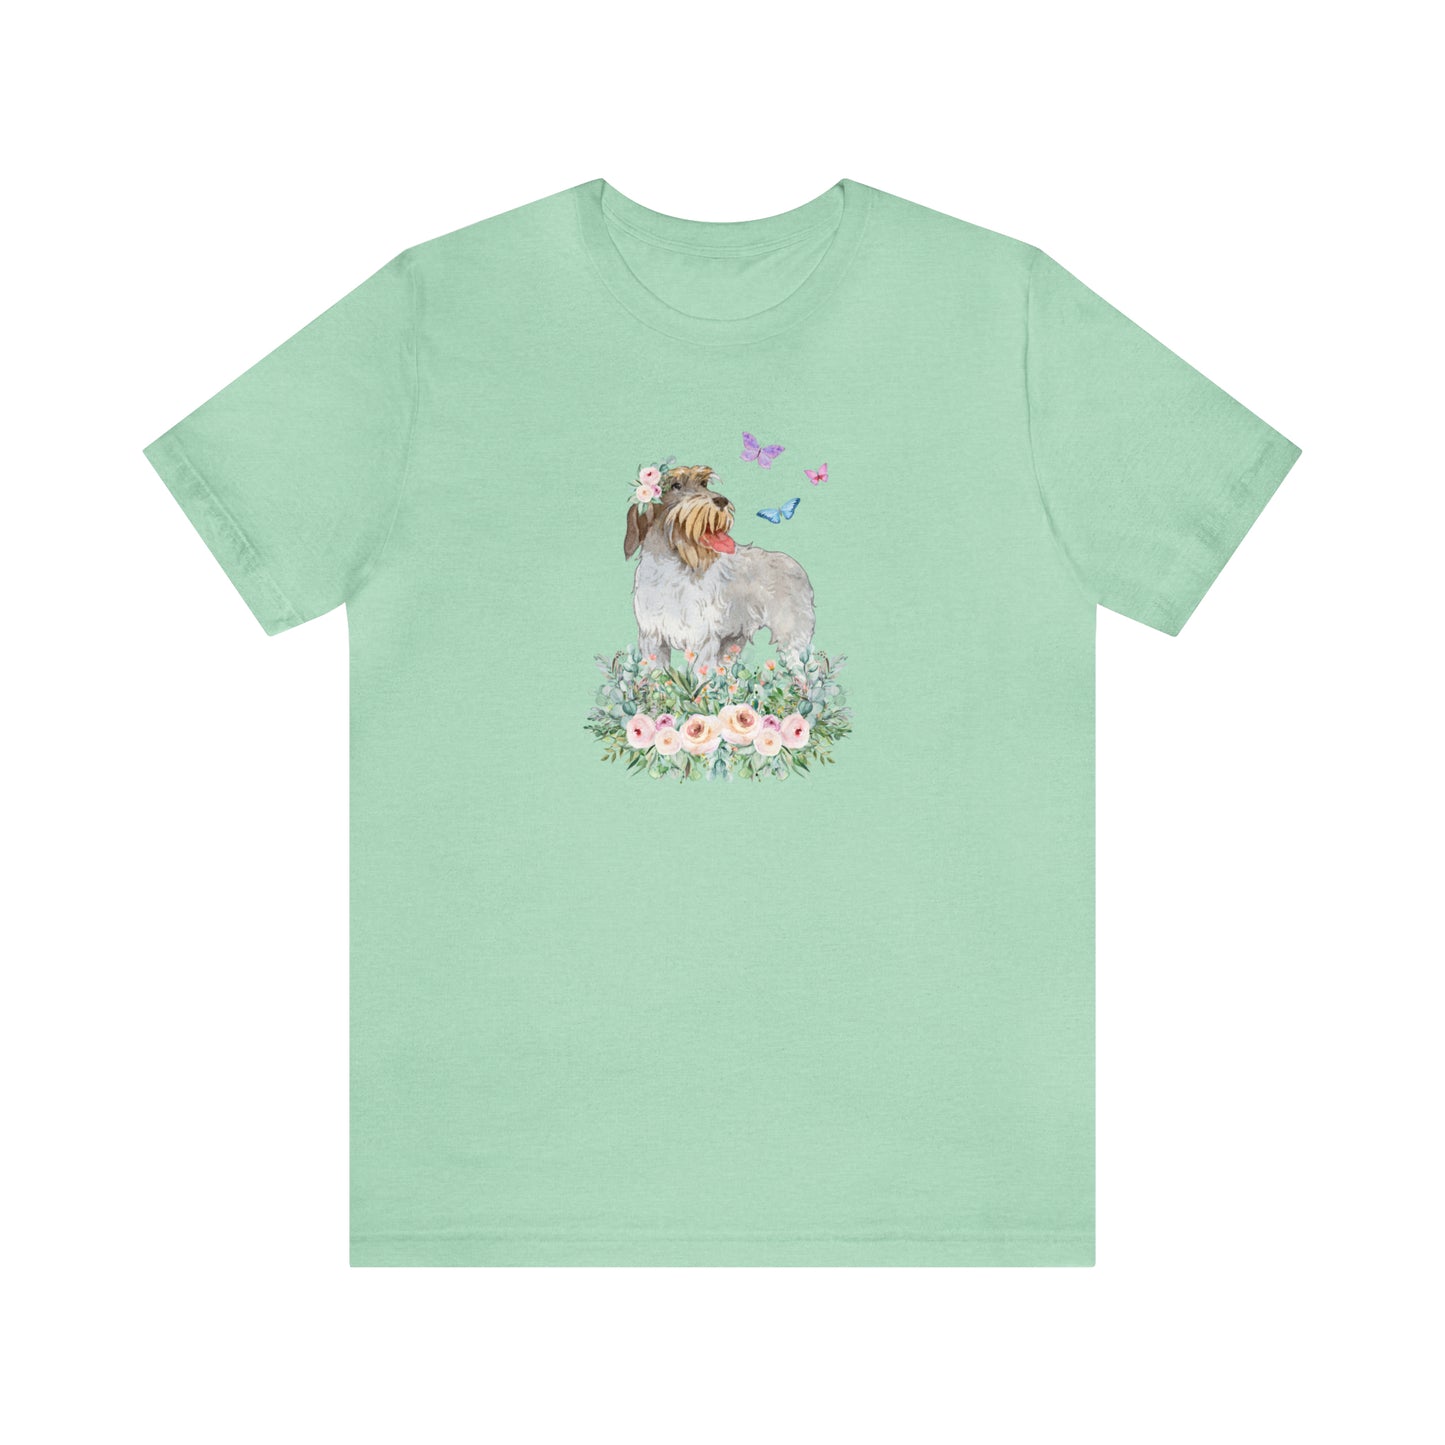 green mint Wirehaired Pointing Griffon in flower rose meadow with butterflies dog lover gift women men t-shirt unisex short sleeve shirt